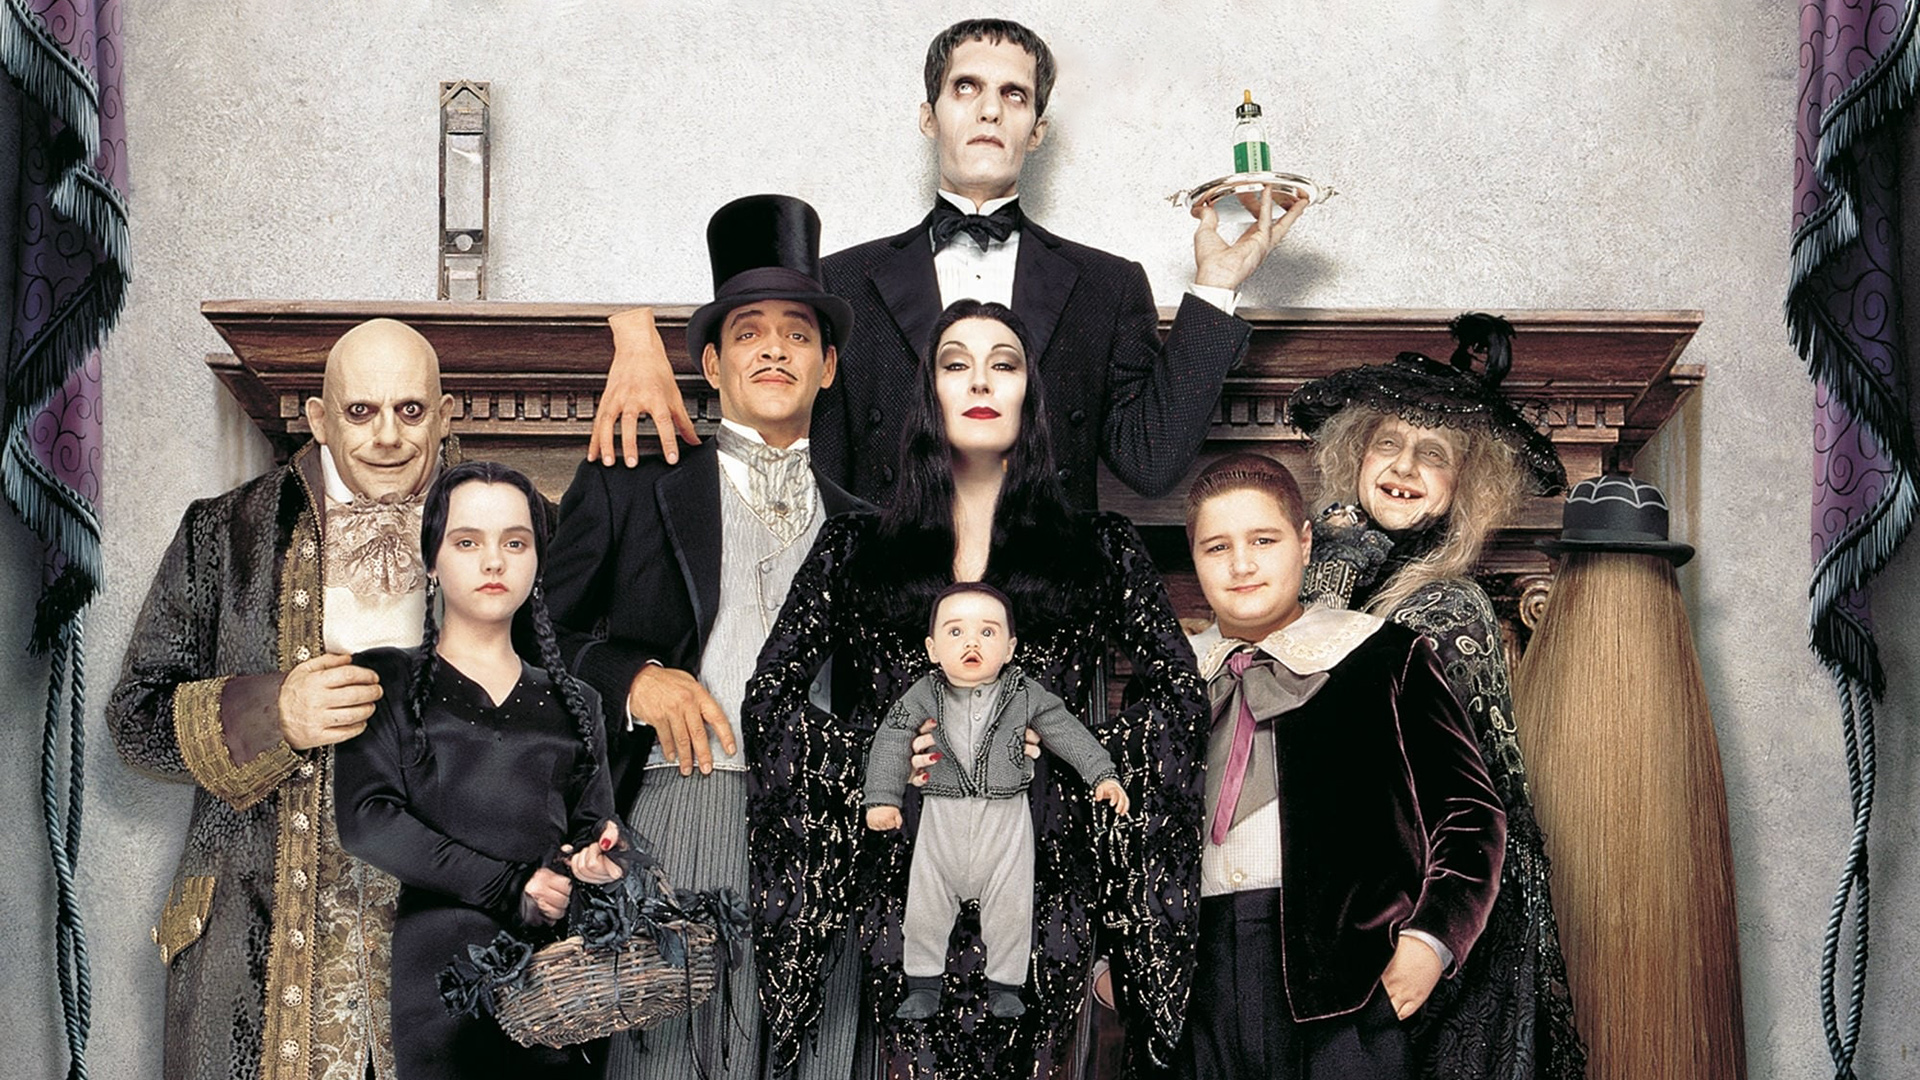 The Addams Family 2 Wallpapers